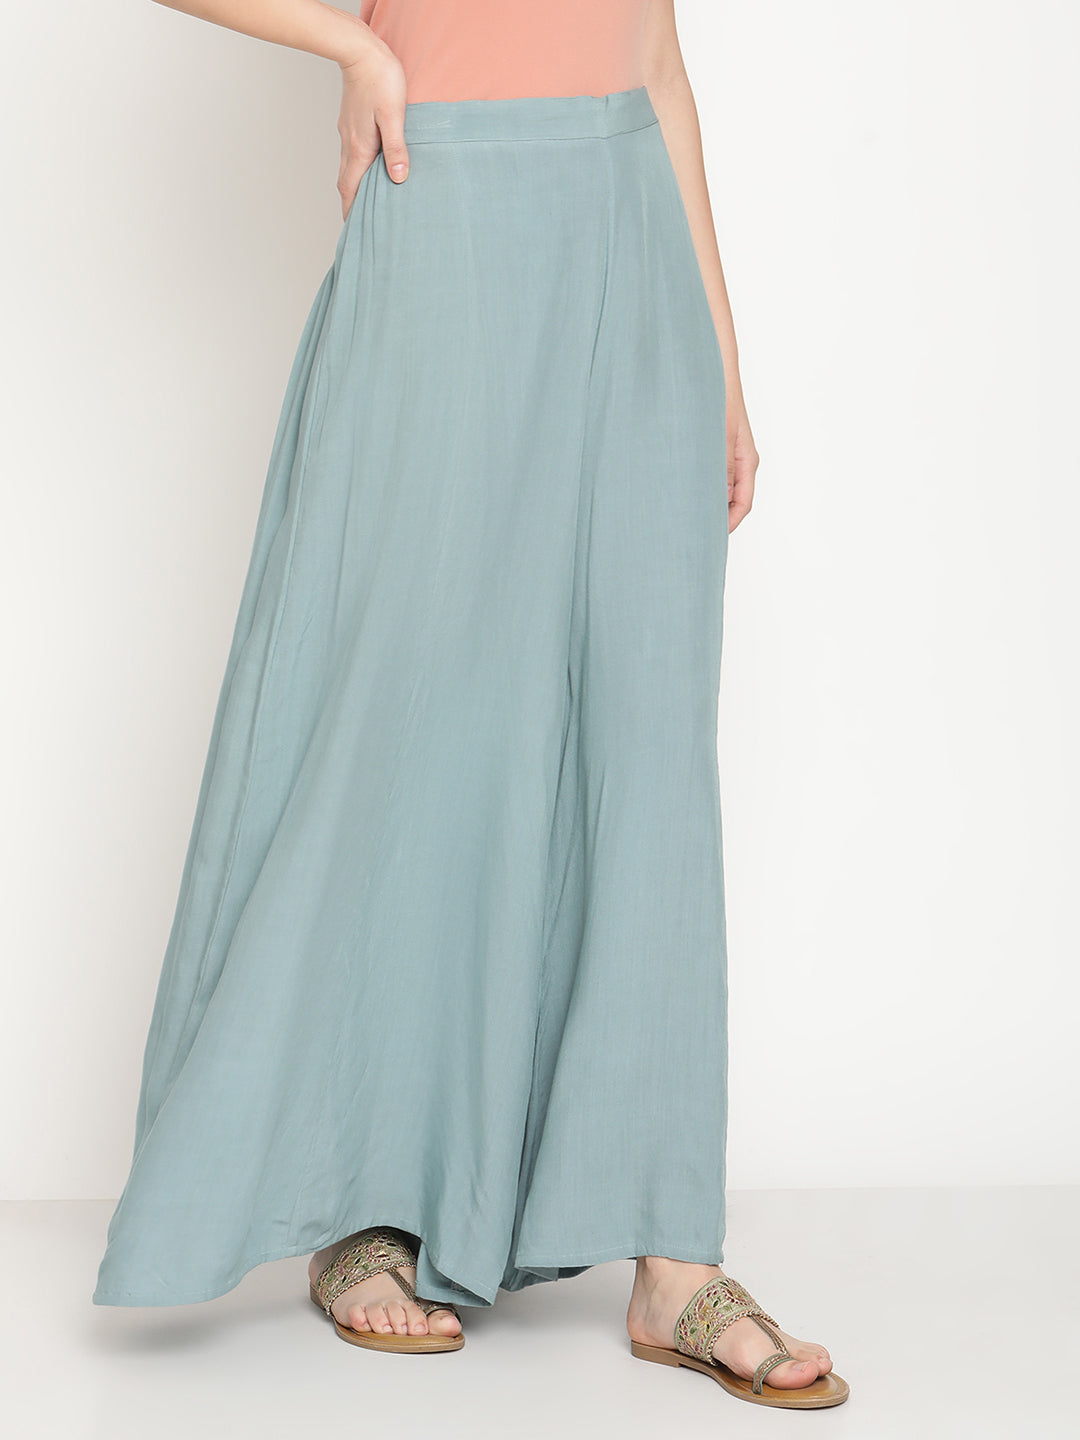 Buy Sky Blue Palazzo Pant Cotton Silk for Best Price, Reviews, Free Shipping